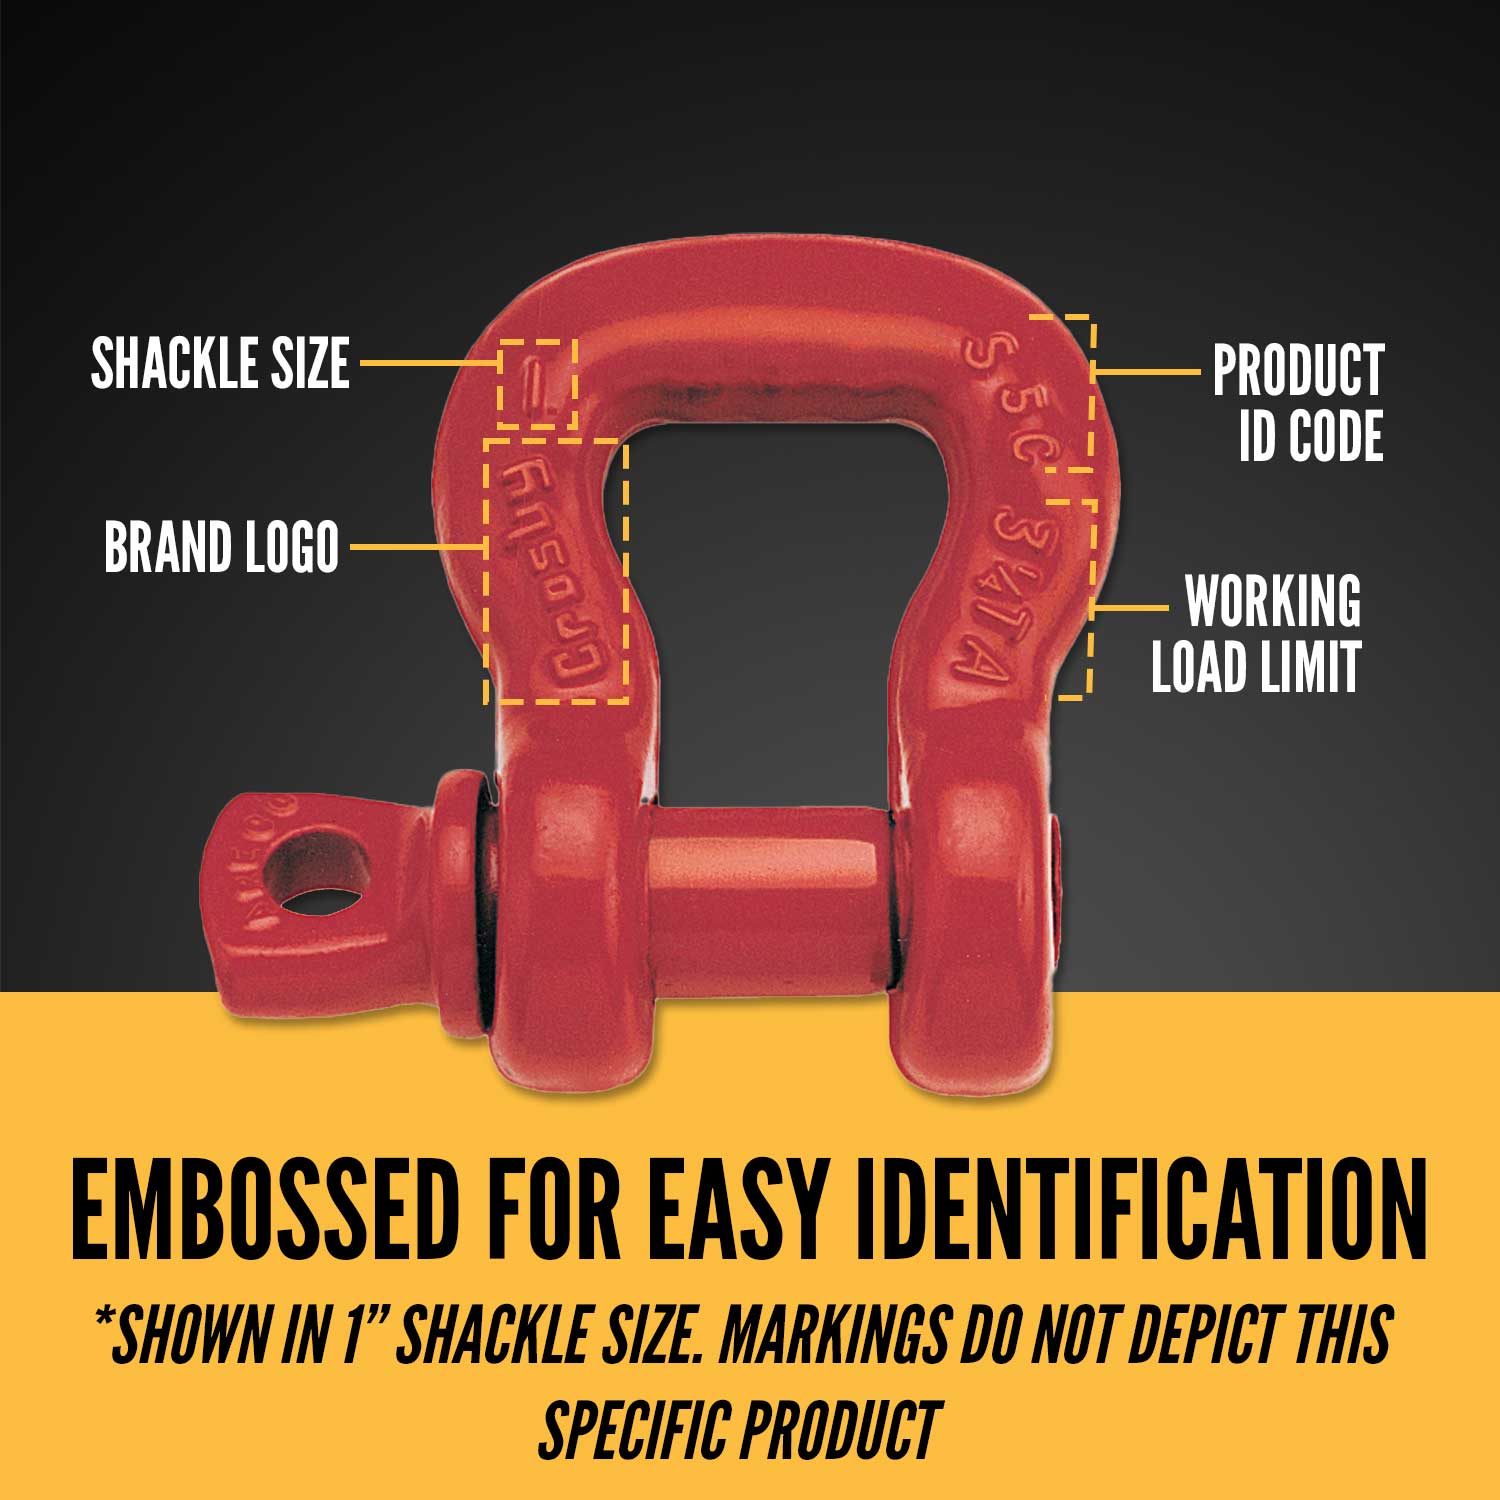 Crosby® Screw Pin Sling Saver Shackle | S-253 - 1"- 3.25 Ton embossed for easy identification